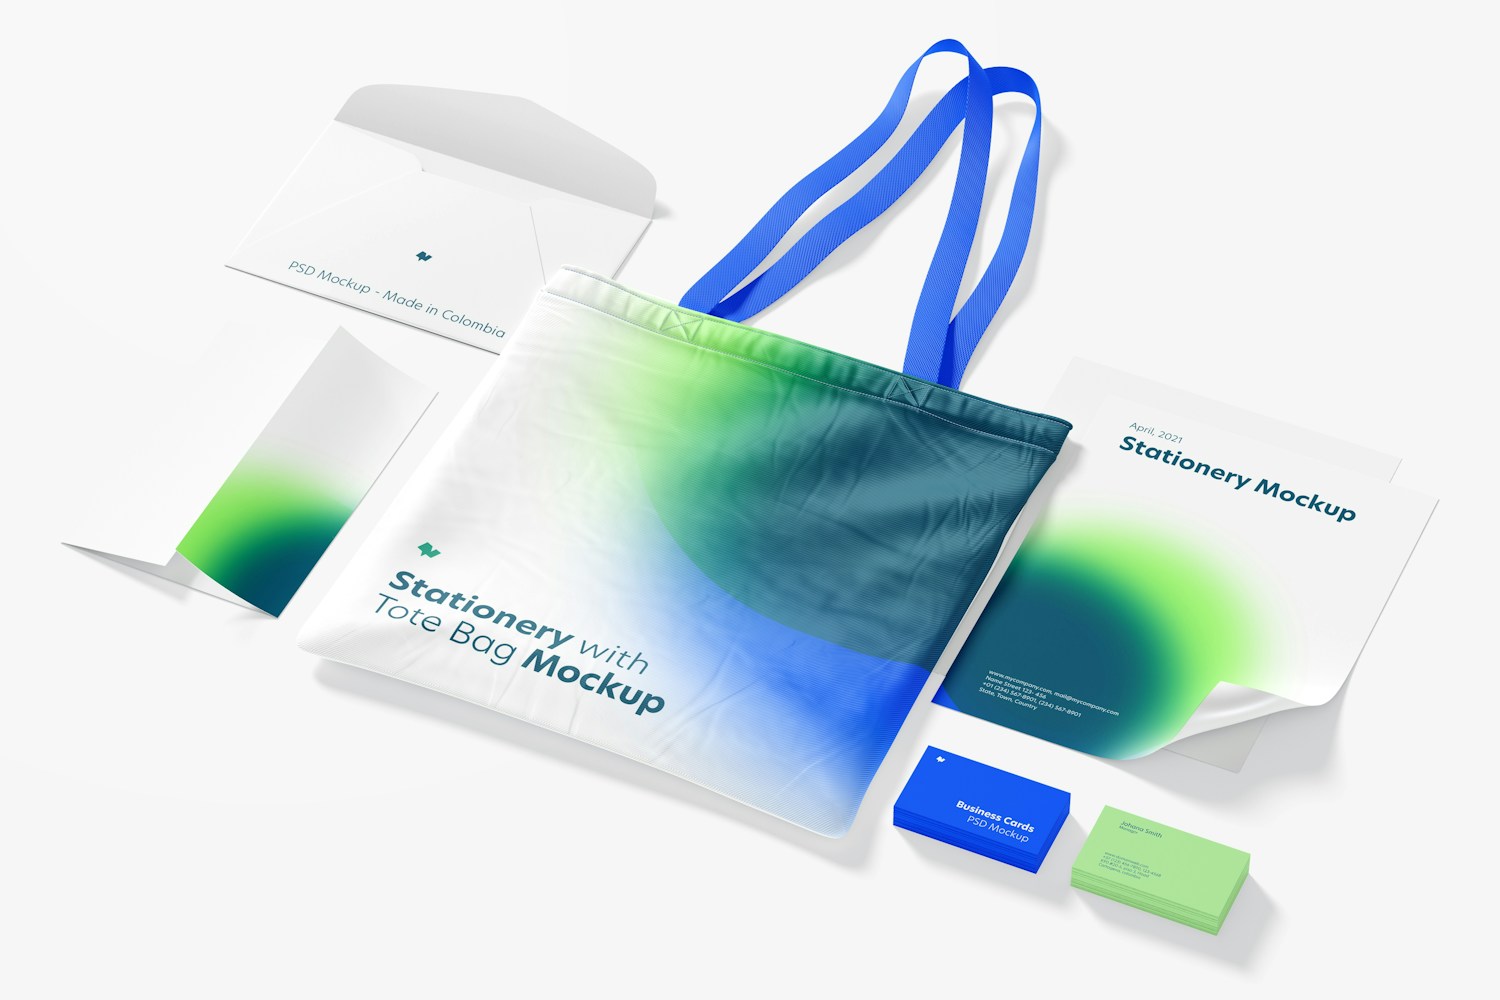 Stationery with Tote Bag Mockup, Perspective View